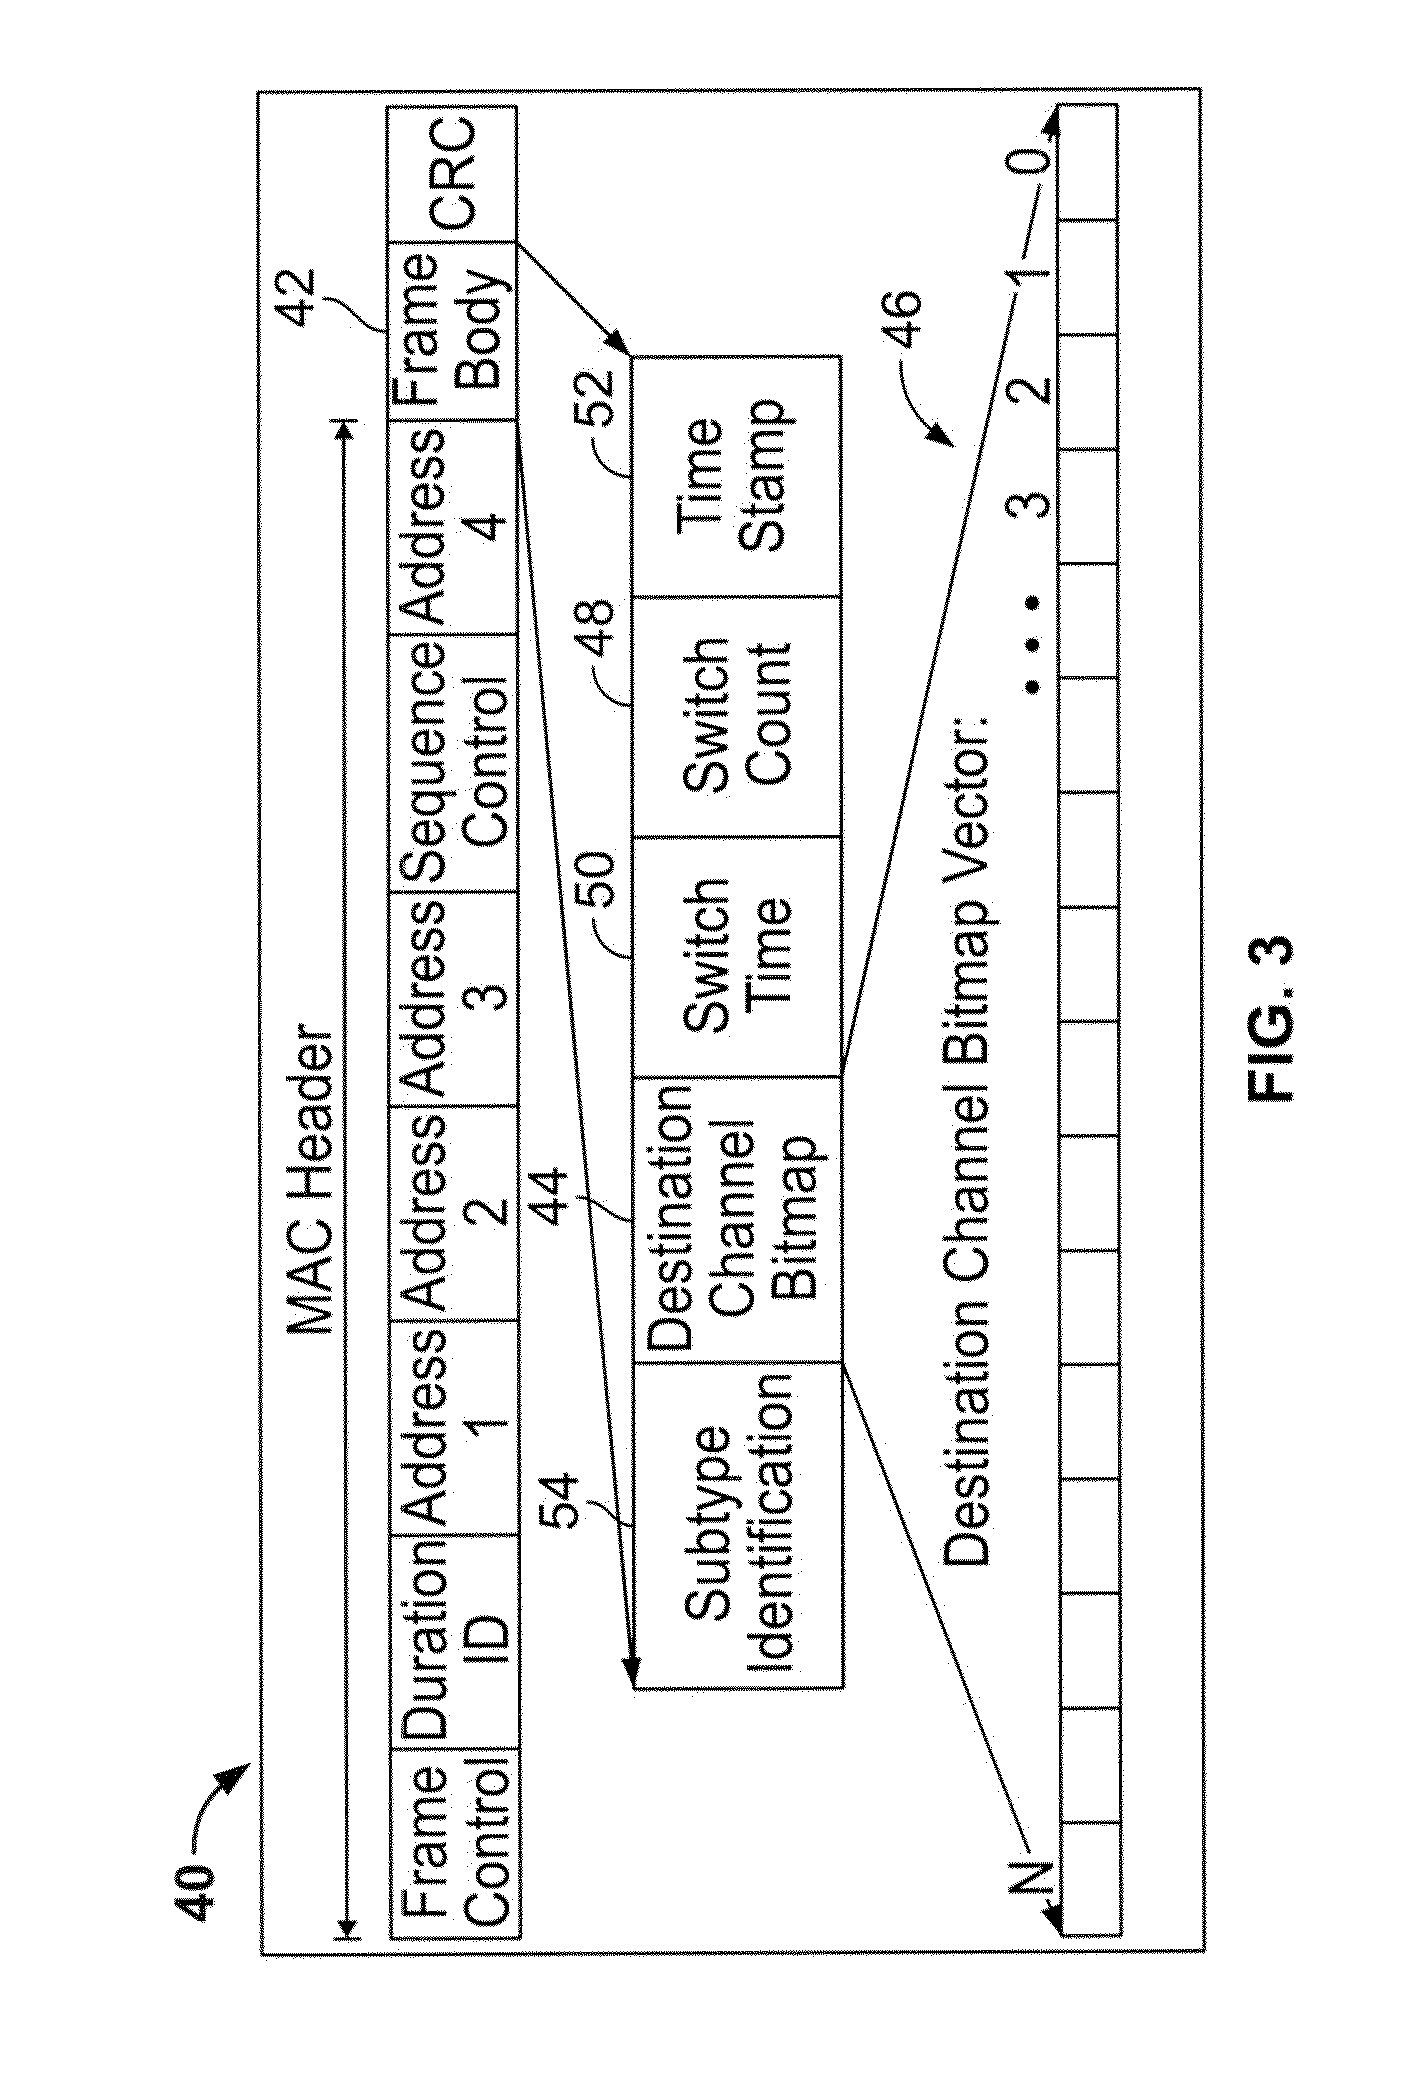 Method and apparatus for dynamic spectrum access